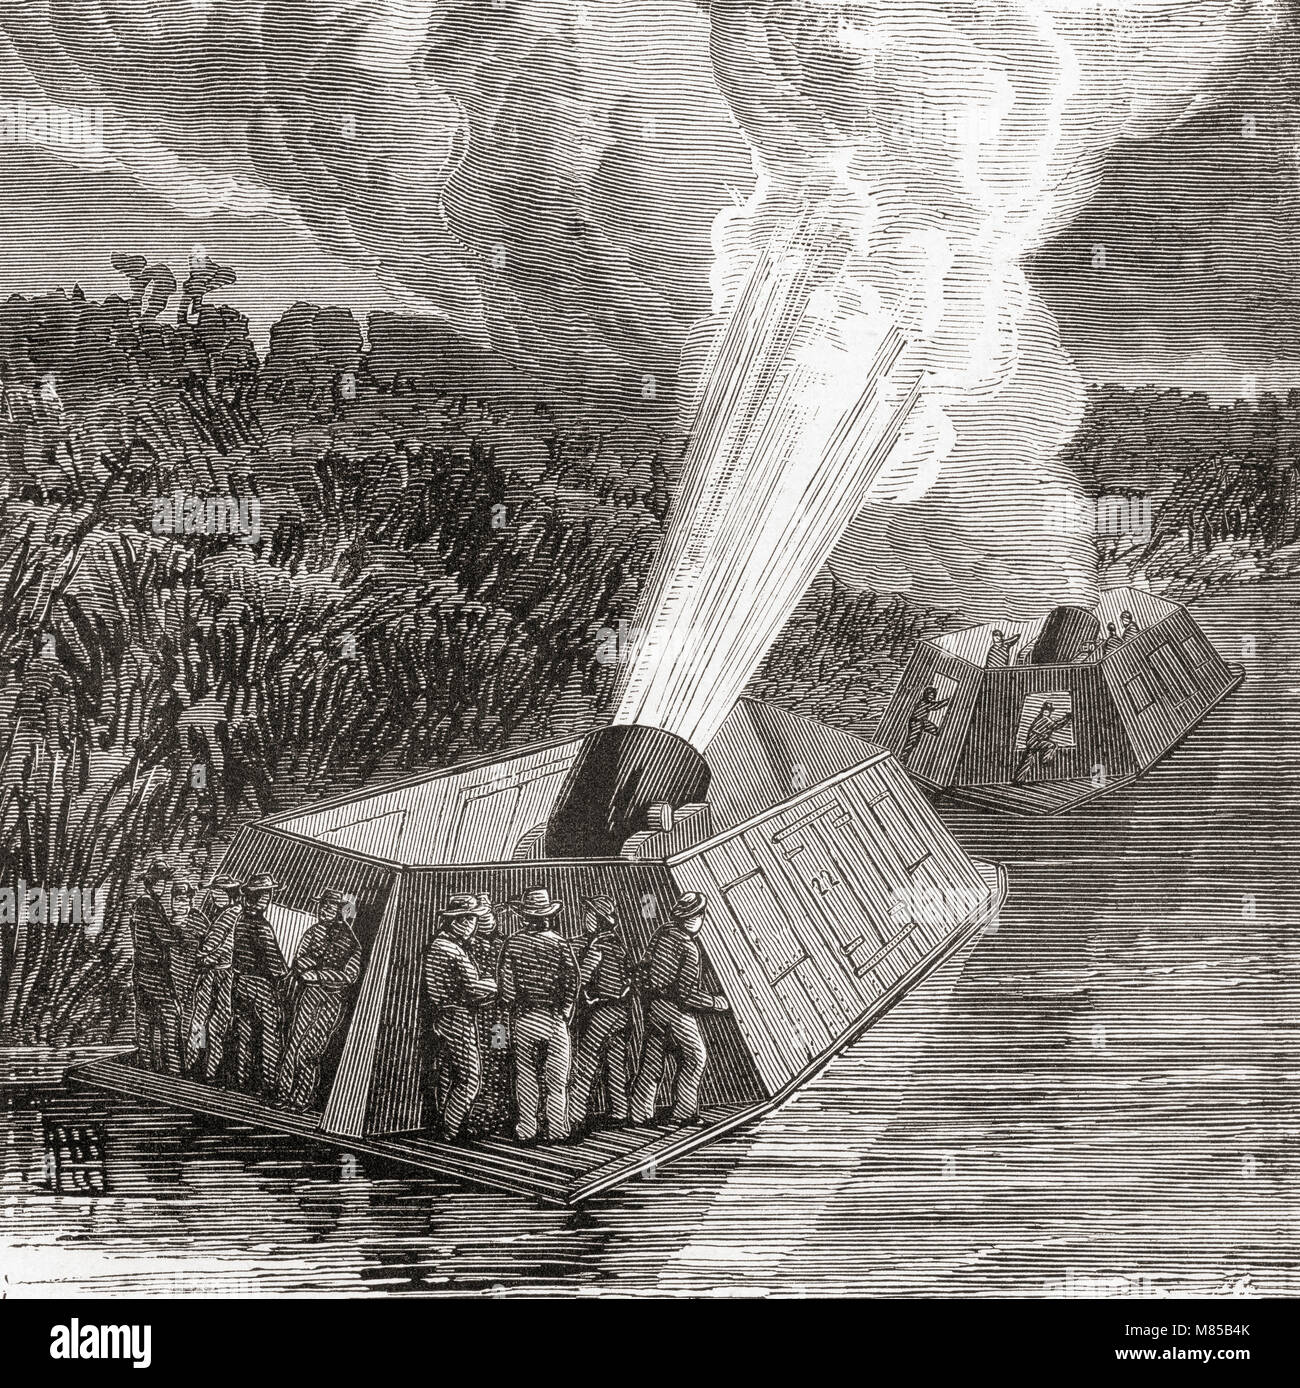 Bombardment by mortar boats on the Mississippi during the American Civil War, 1861-1865.   From Ward and Lock's Illustrated History of the World, published c.1882. Stock Photo